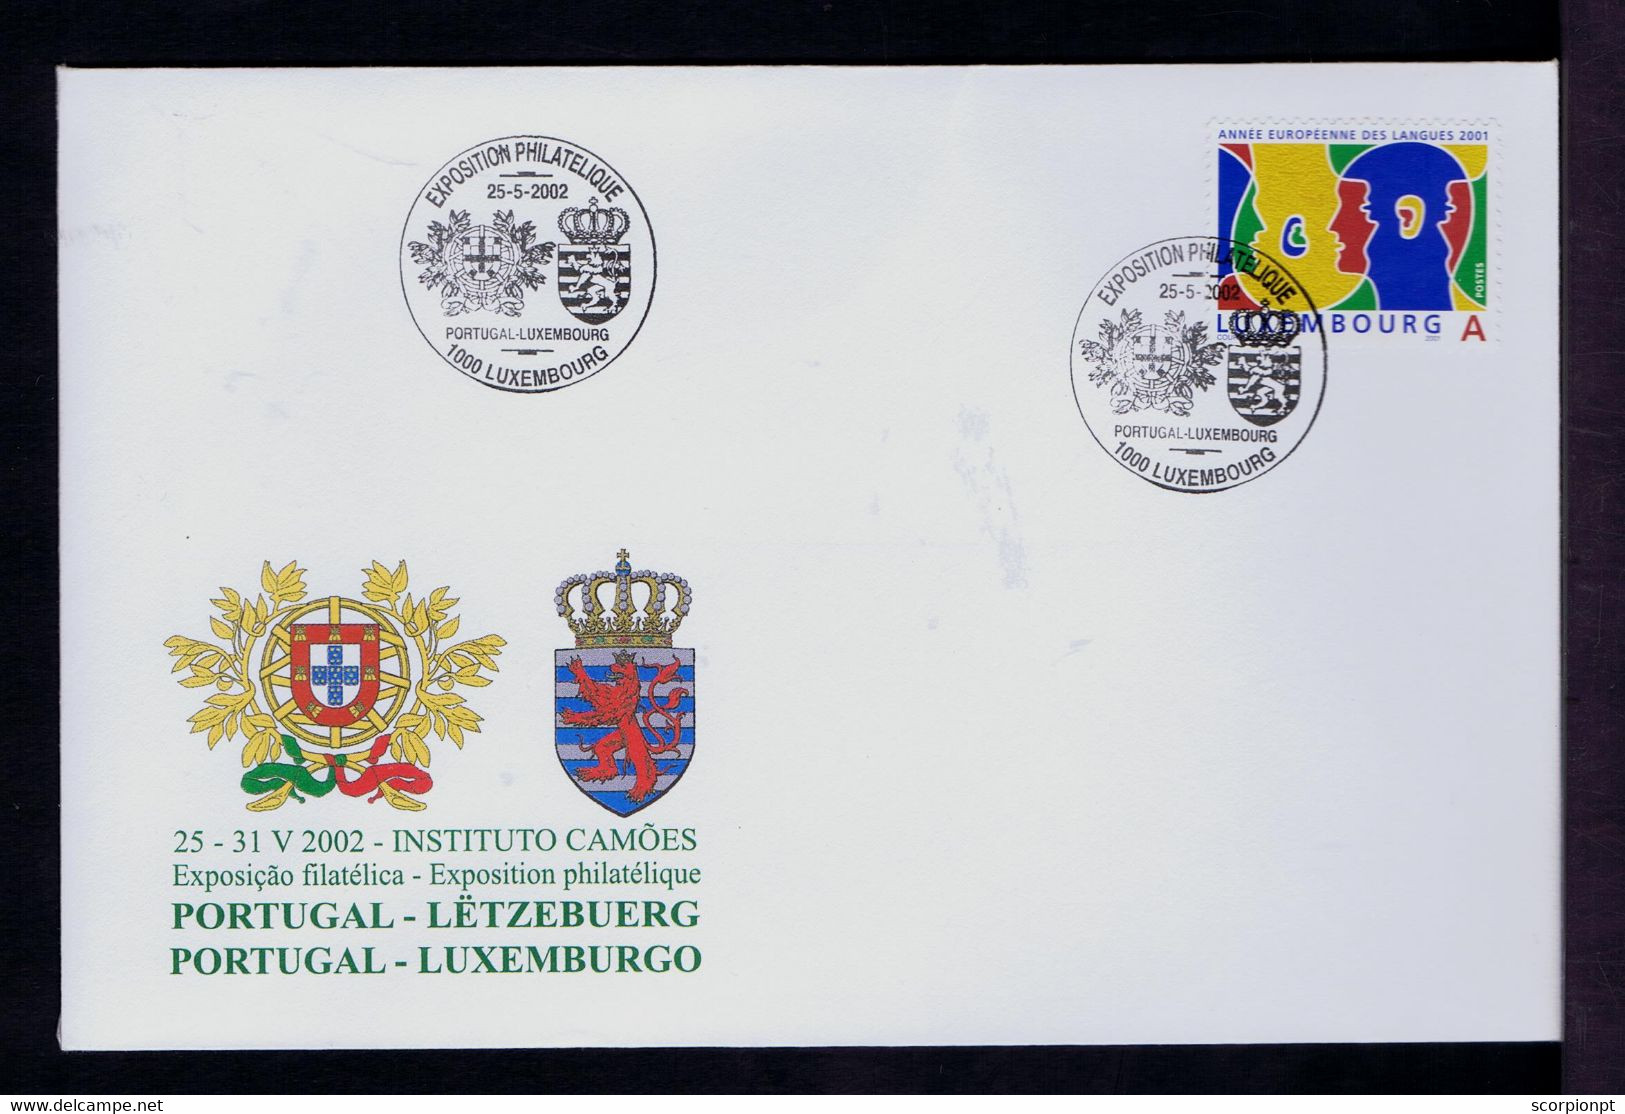 Portugal Luxembourg Brasons Coat Of Arms 2002 Philatelic Exhibition Heraldic Sp7529 - Holograms